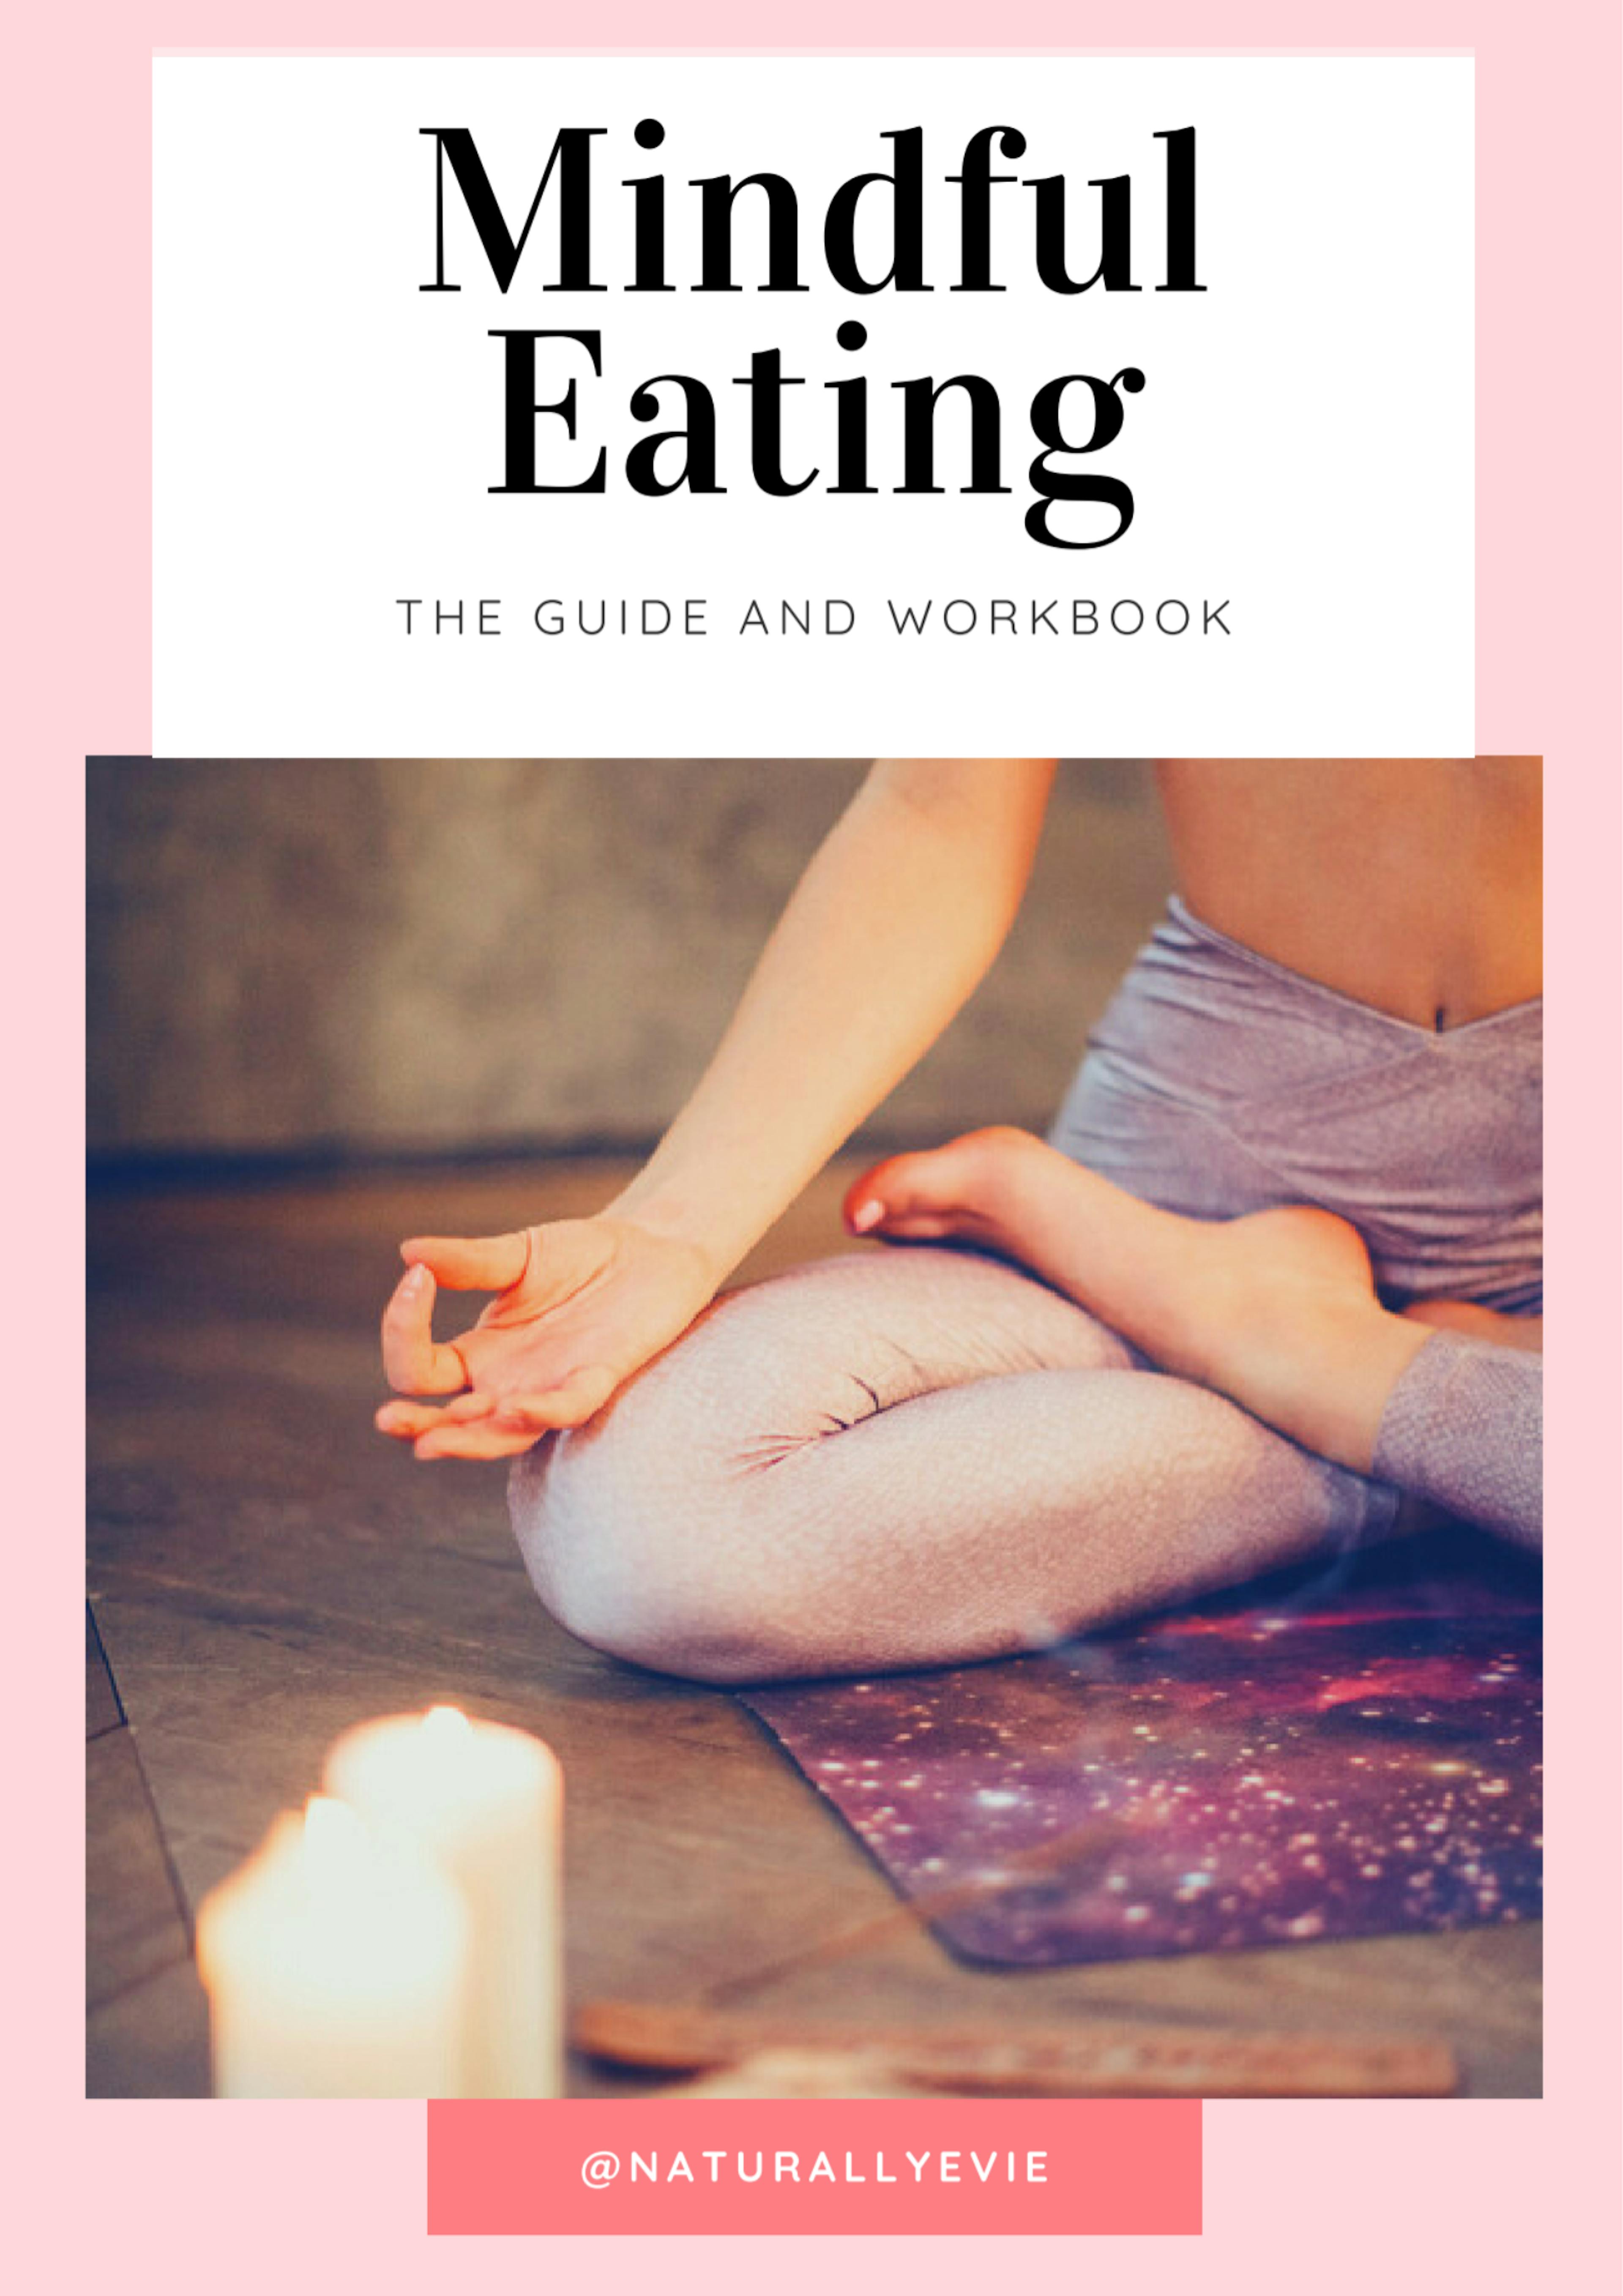 Ebooks | Intuitive Eating & Mindful Eating